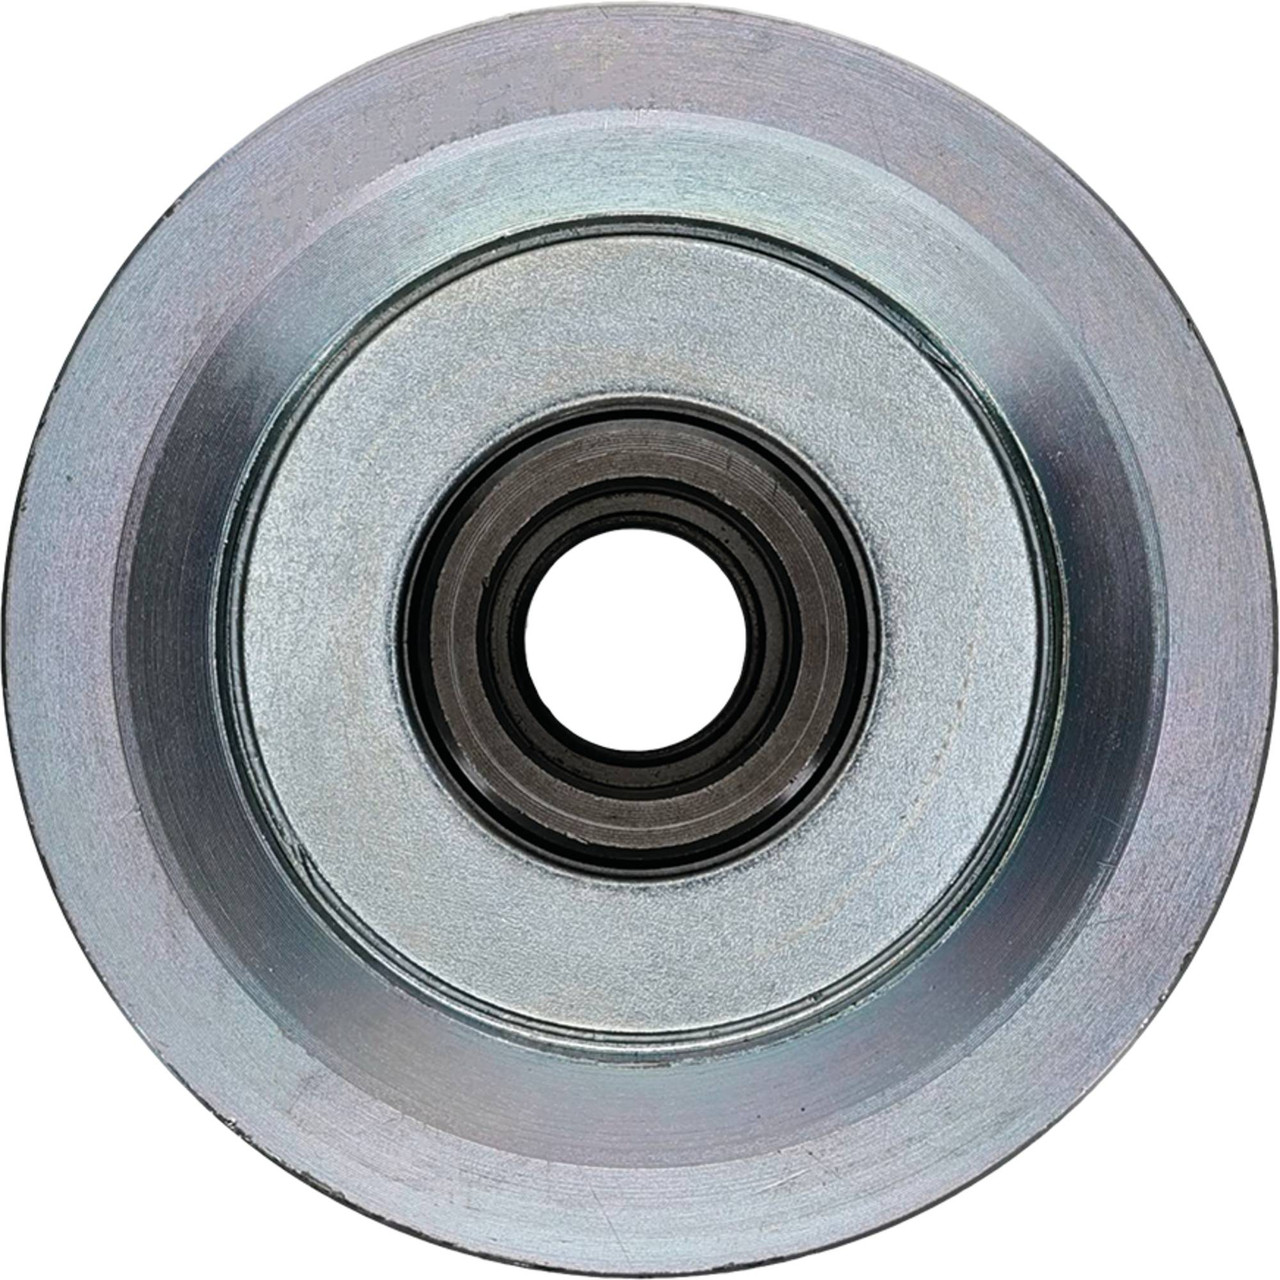 Pulley For Zen S.A 5822 Number of Groove 6 ; 206-52054 - DB Electrical